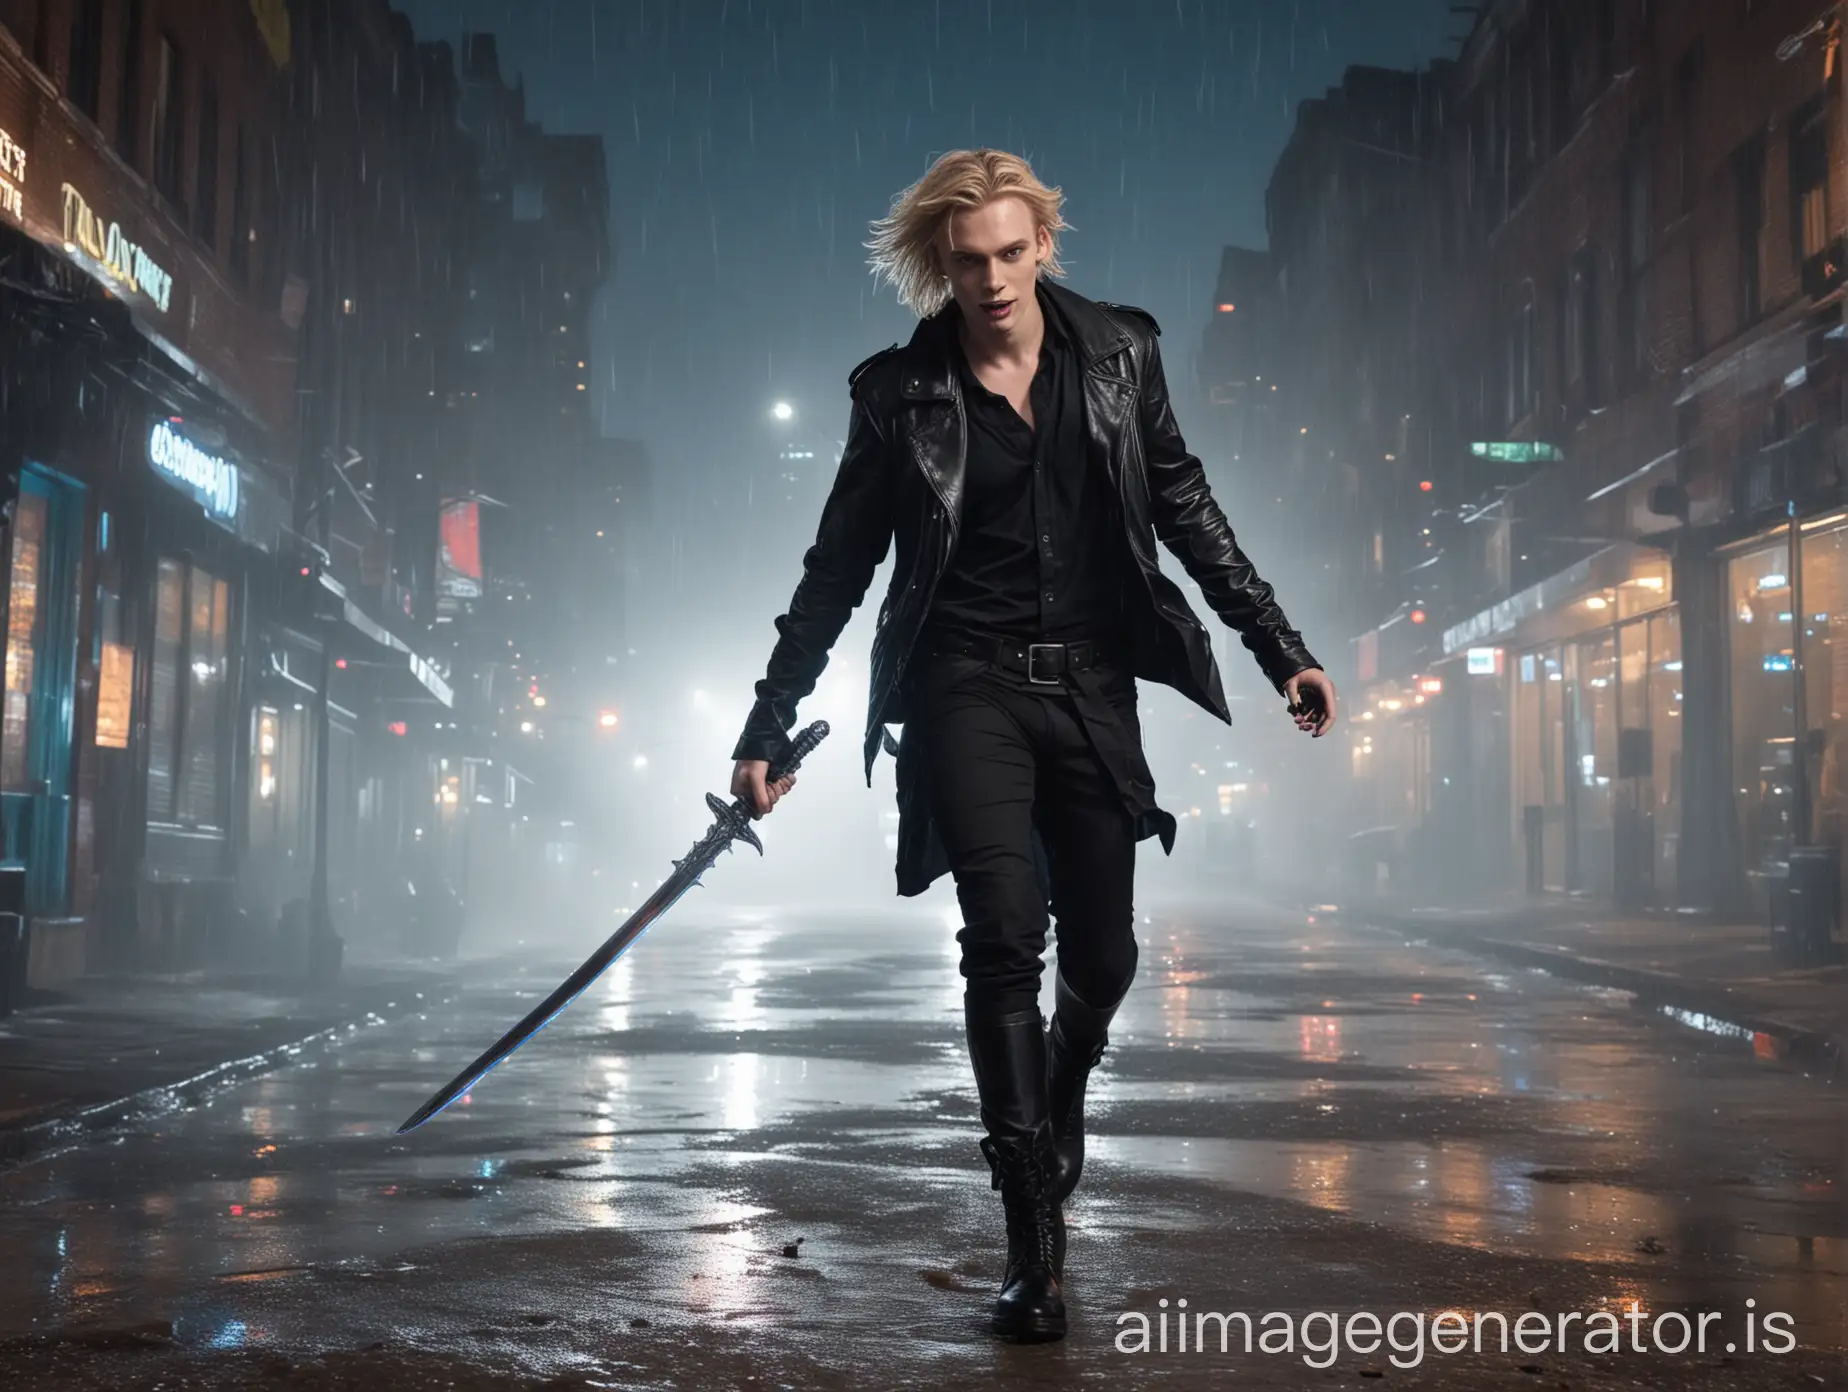 Jamie-Campbell-Bower-with-Glowing-Sword-in-Toronto-City-Night